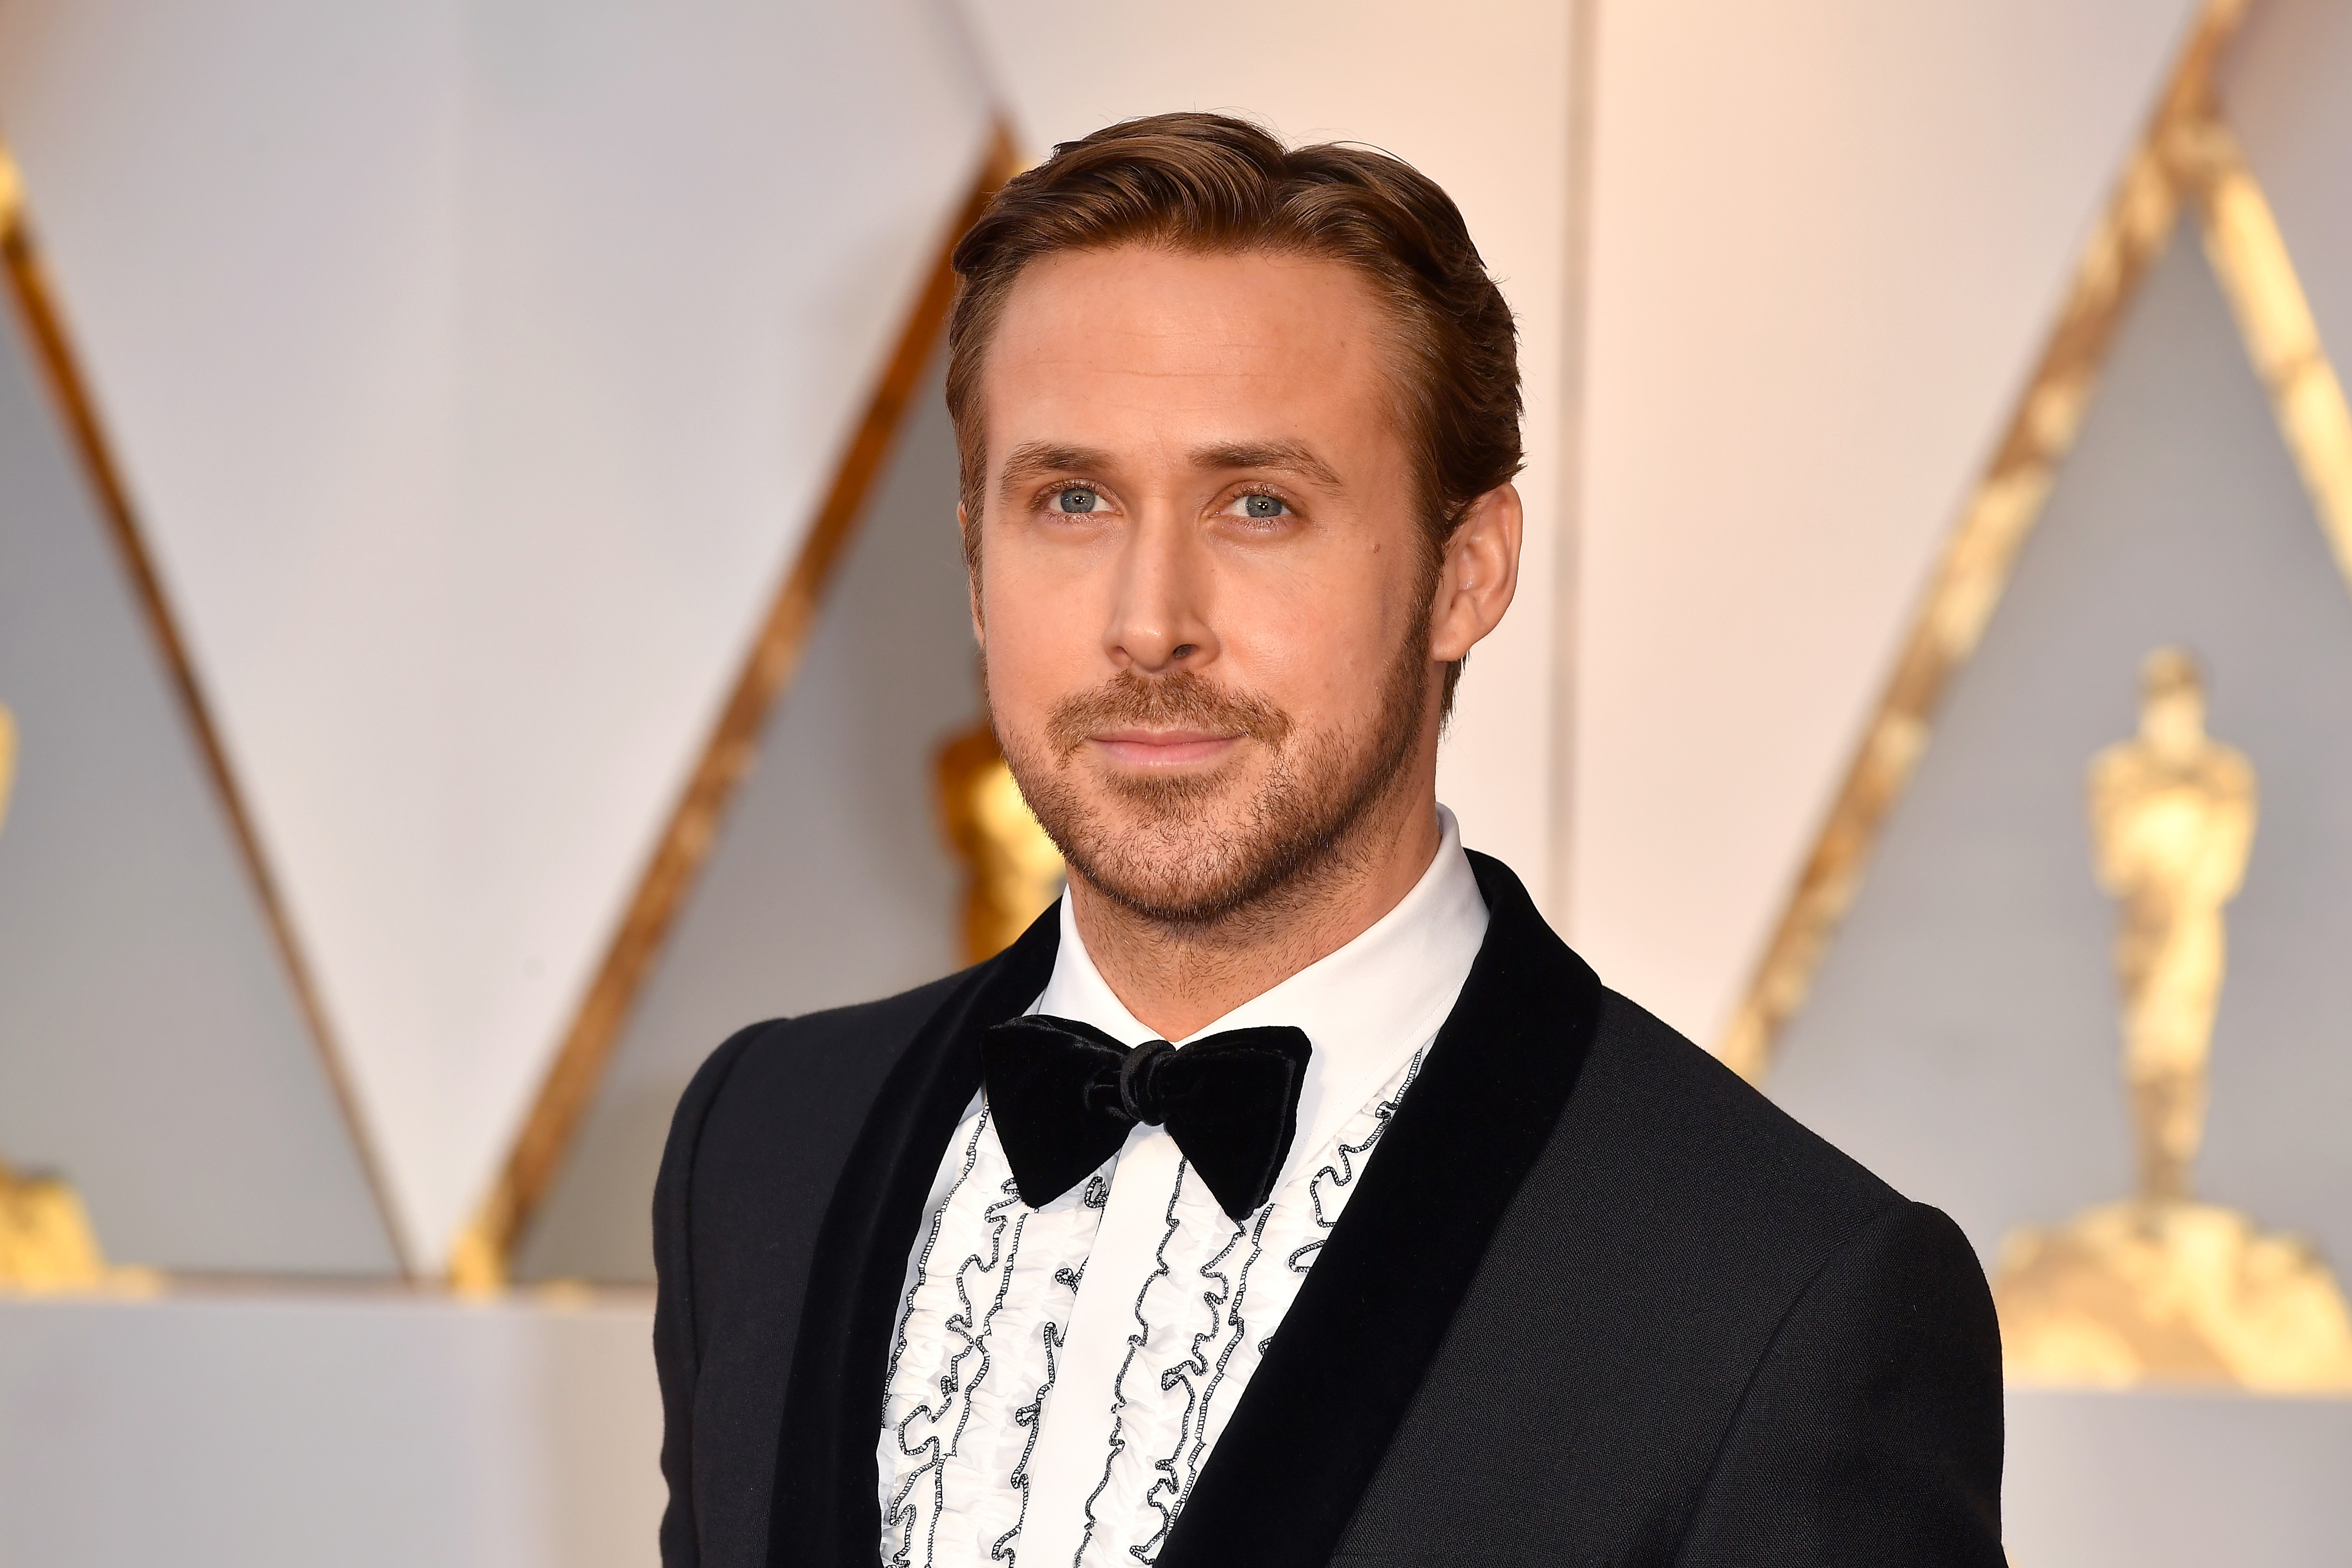 Ryan Gosling attends the 89th Annual Academy Awards at Hollywood & Highland Center in Hollywood, California, on February 26, 2017. | Source: Getty Images